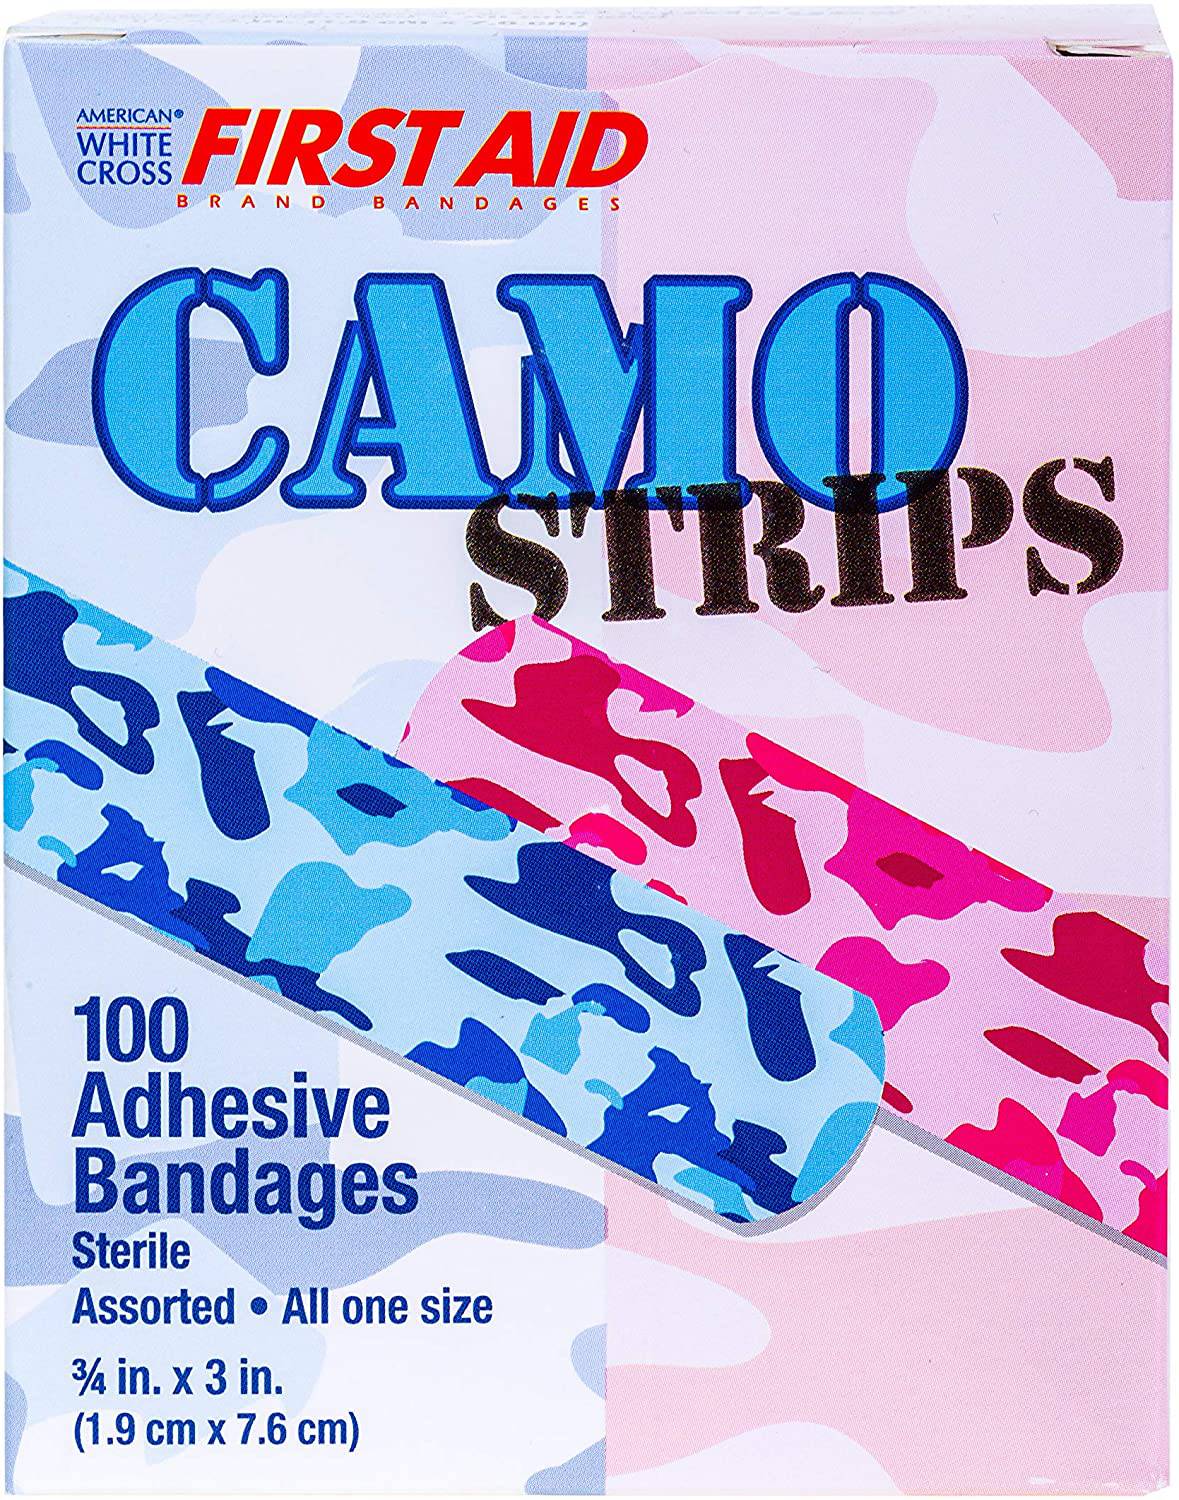 DUKAL 16700 Neutramax Blue and Pink Camo Stat Strip (Box of 100)